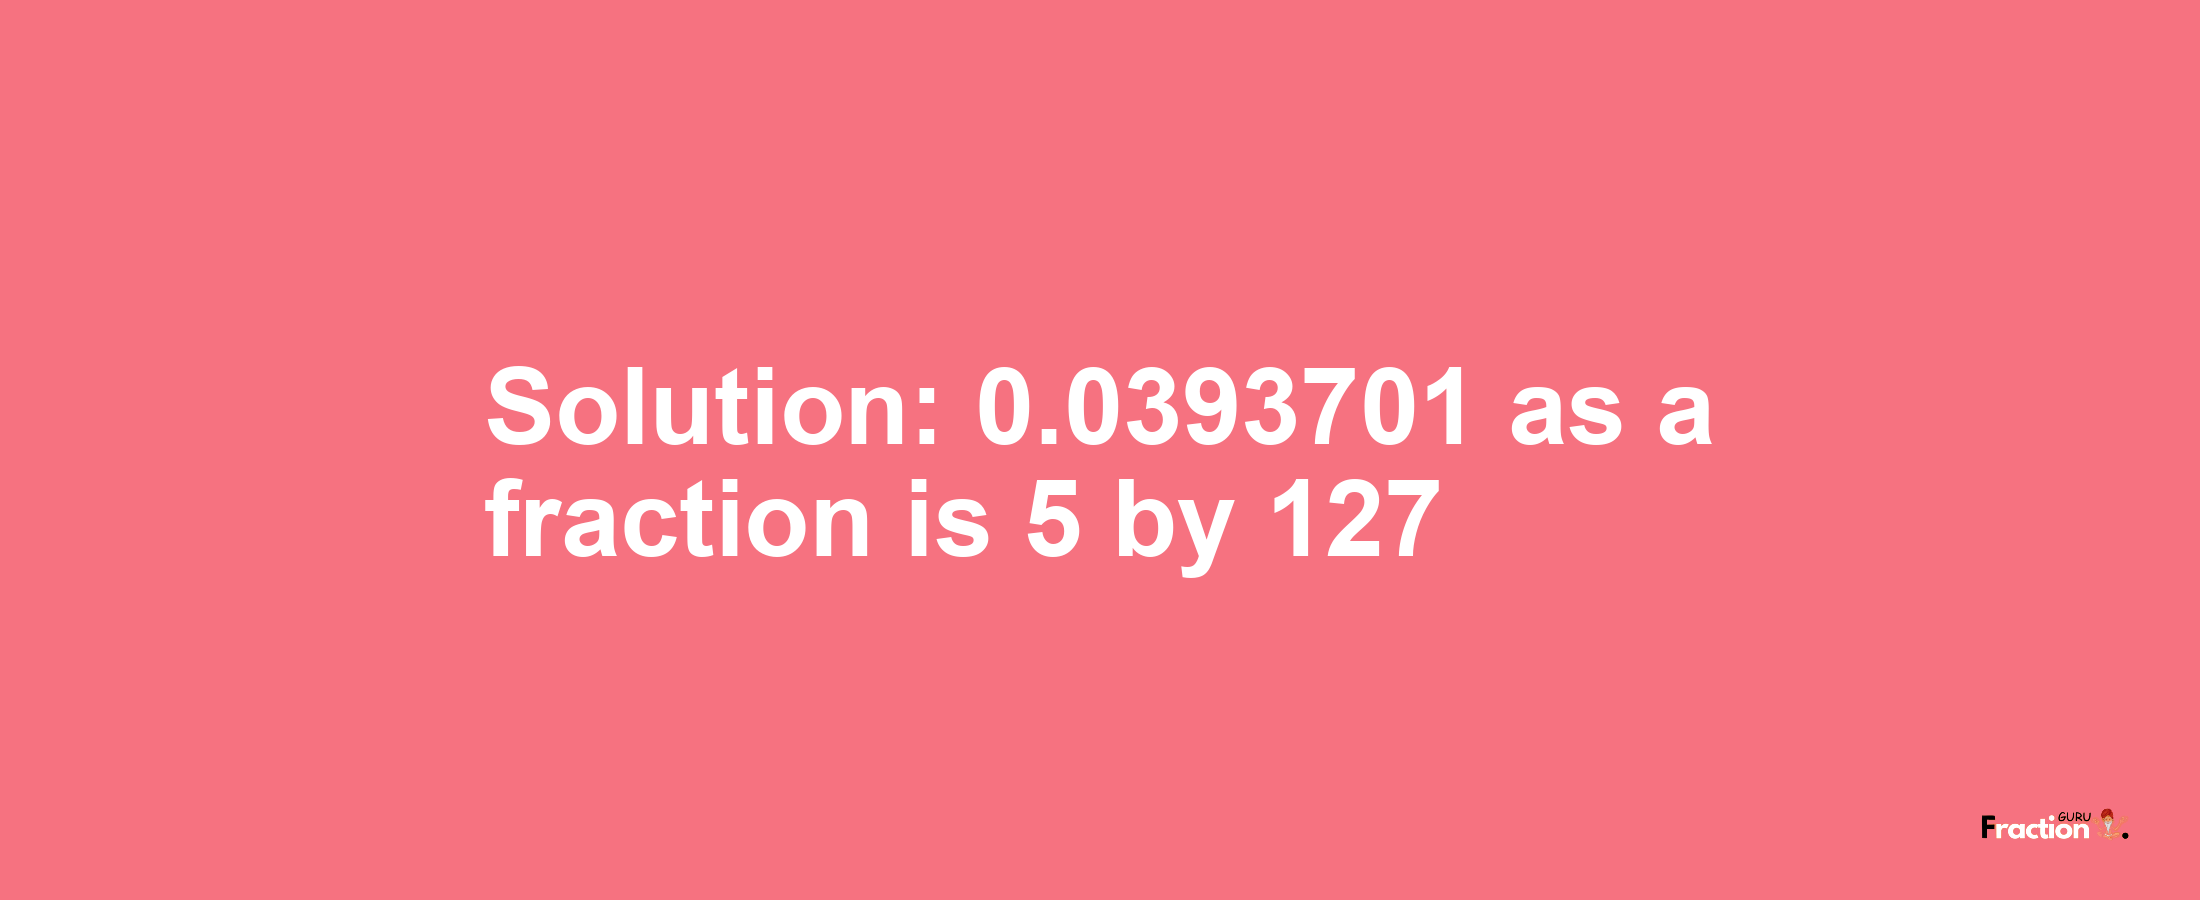 Solution:0.0393701 as a fraction is 5/127